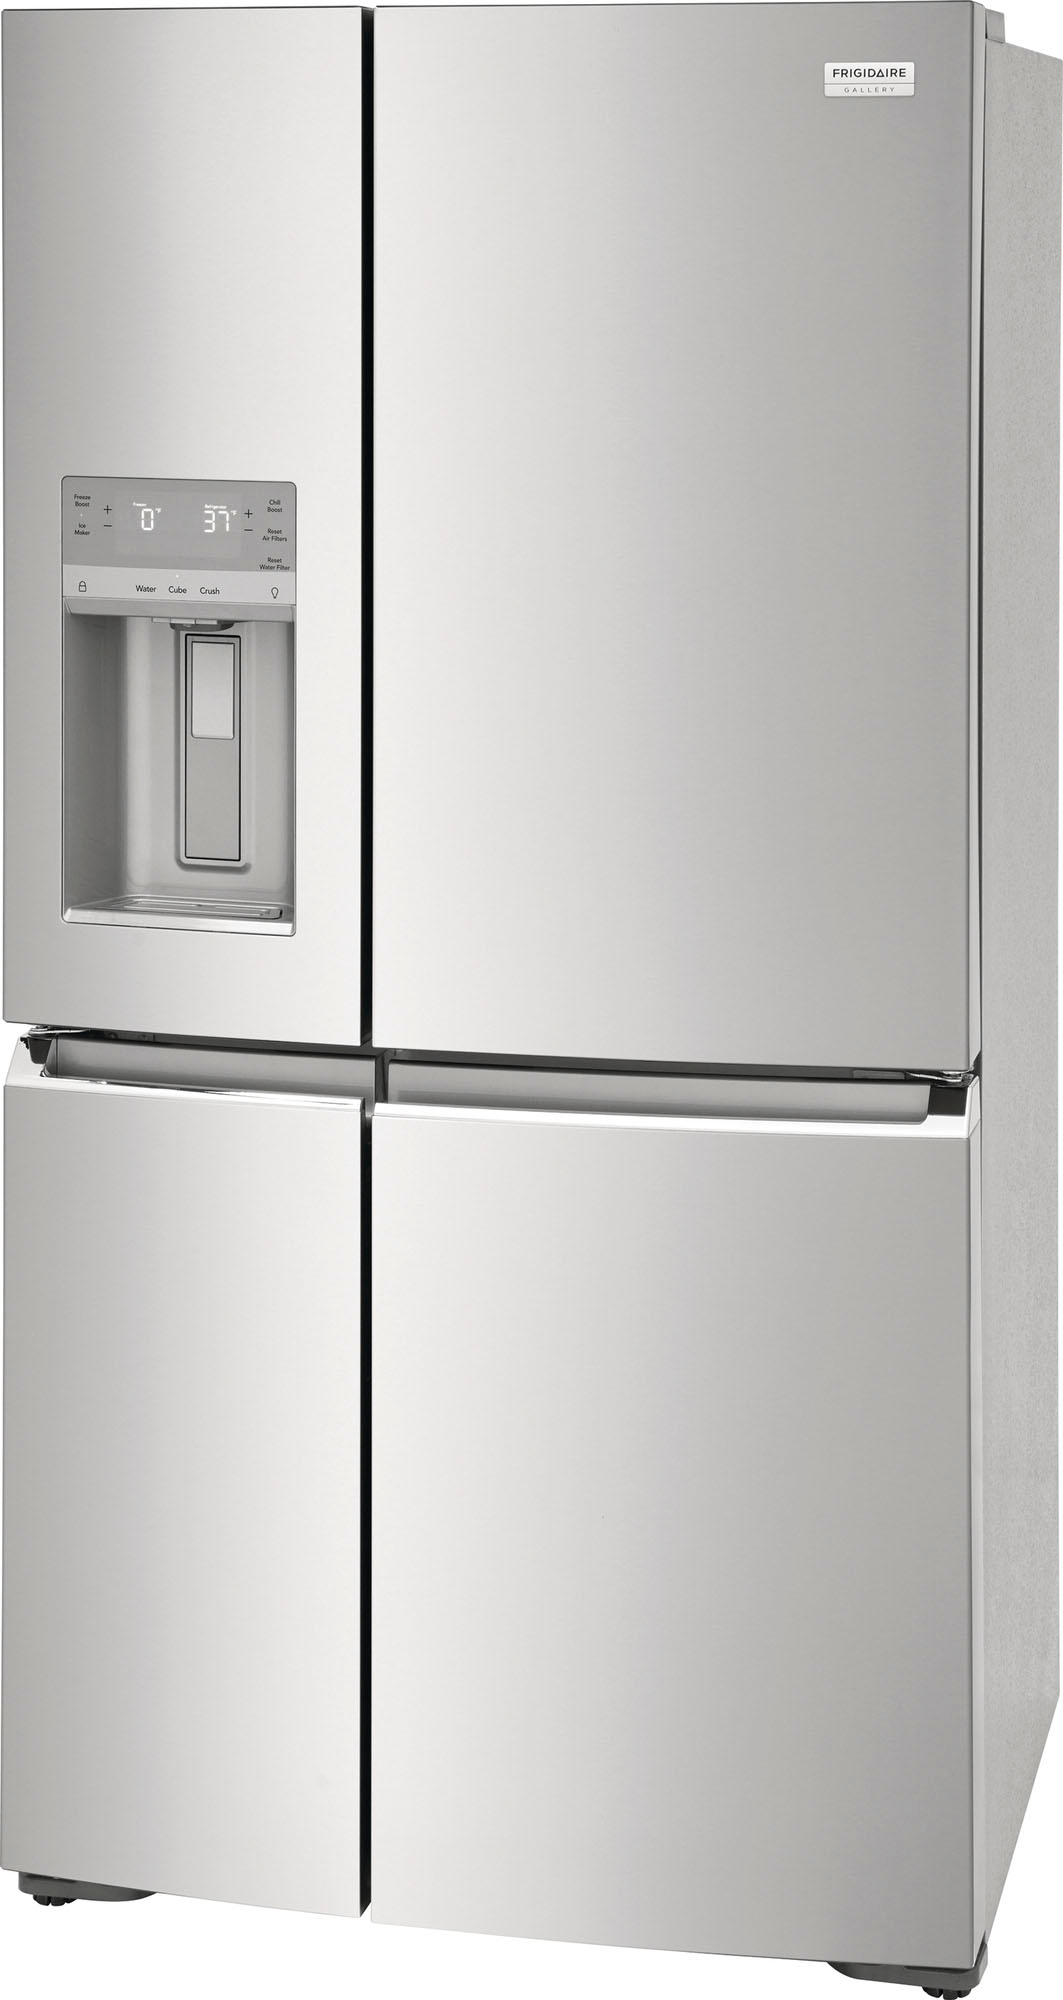 Angle View: Frigidaire - Gallery 21.3 Cu. Ft. Counter-Depth 4-Door Refrigerator - Stainless Steel